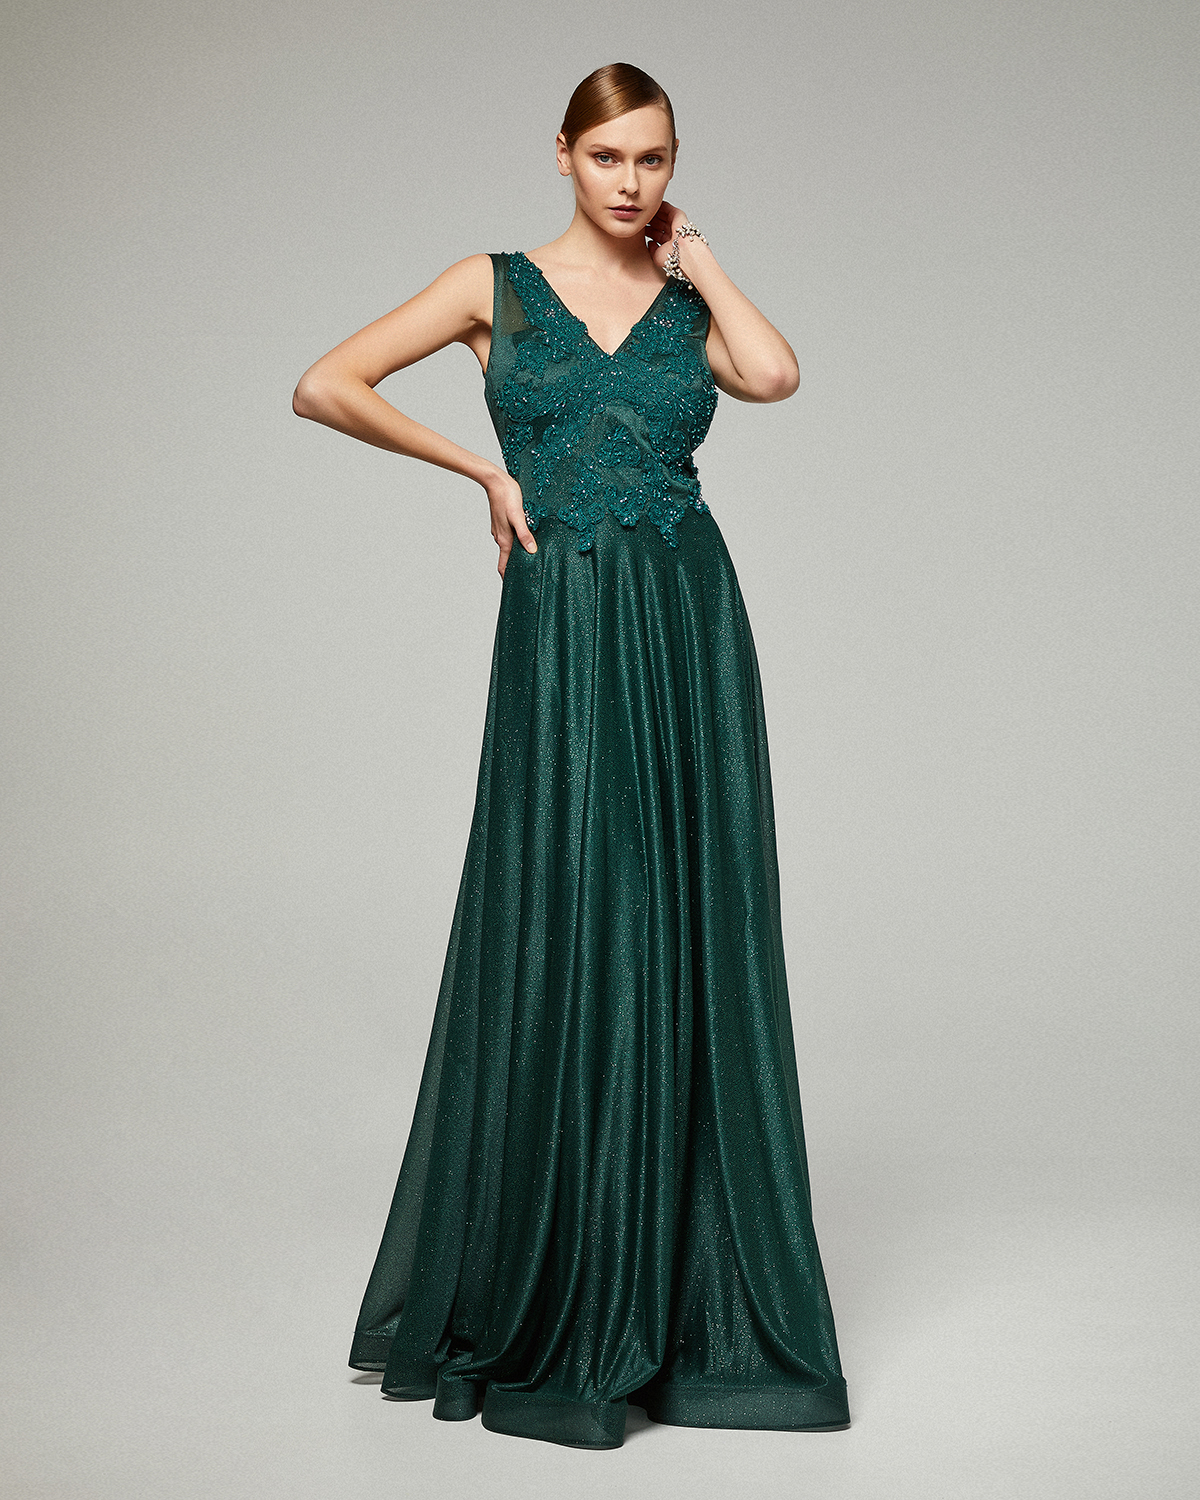 Classic Dresses / Long evening with shining fabric and beaded top